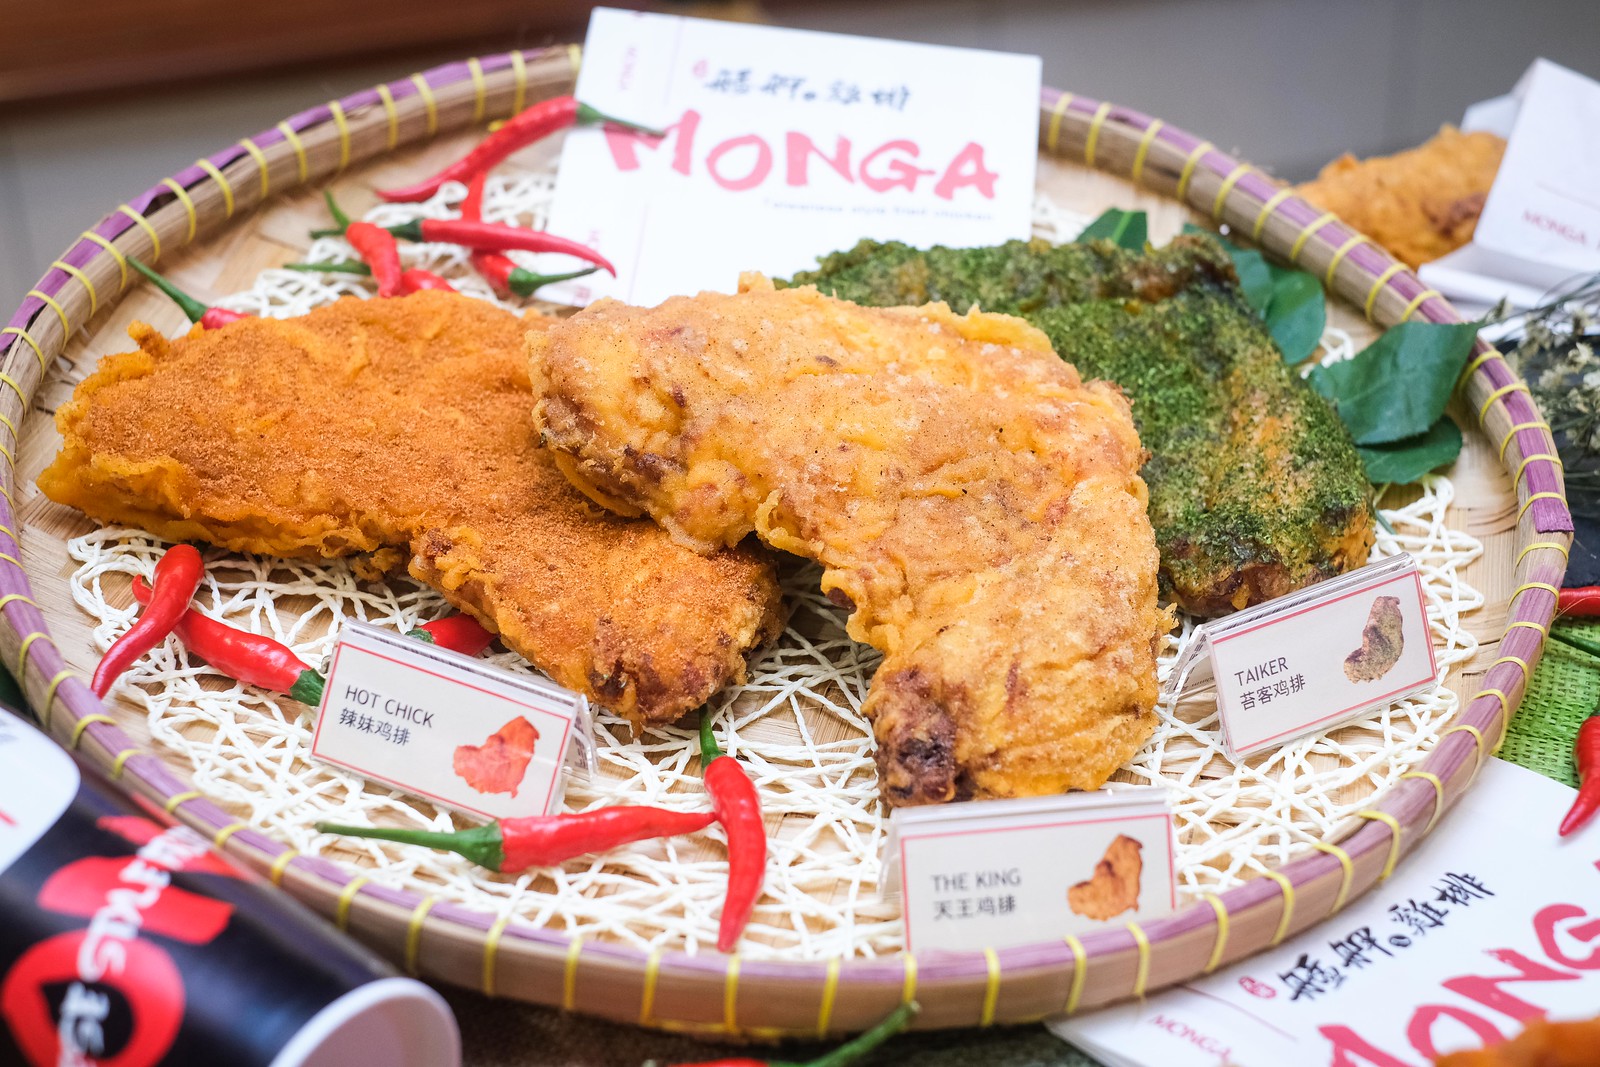 Three type of fried chicken on a woven tray